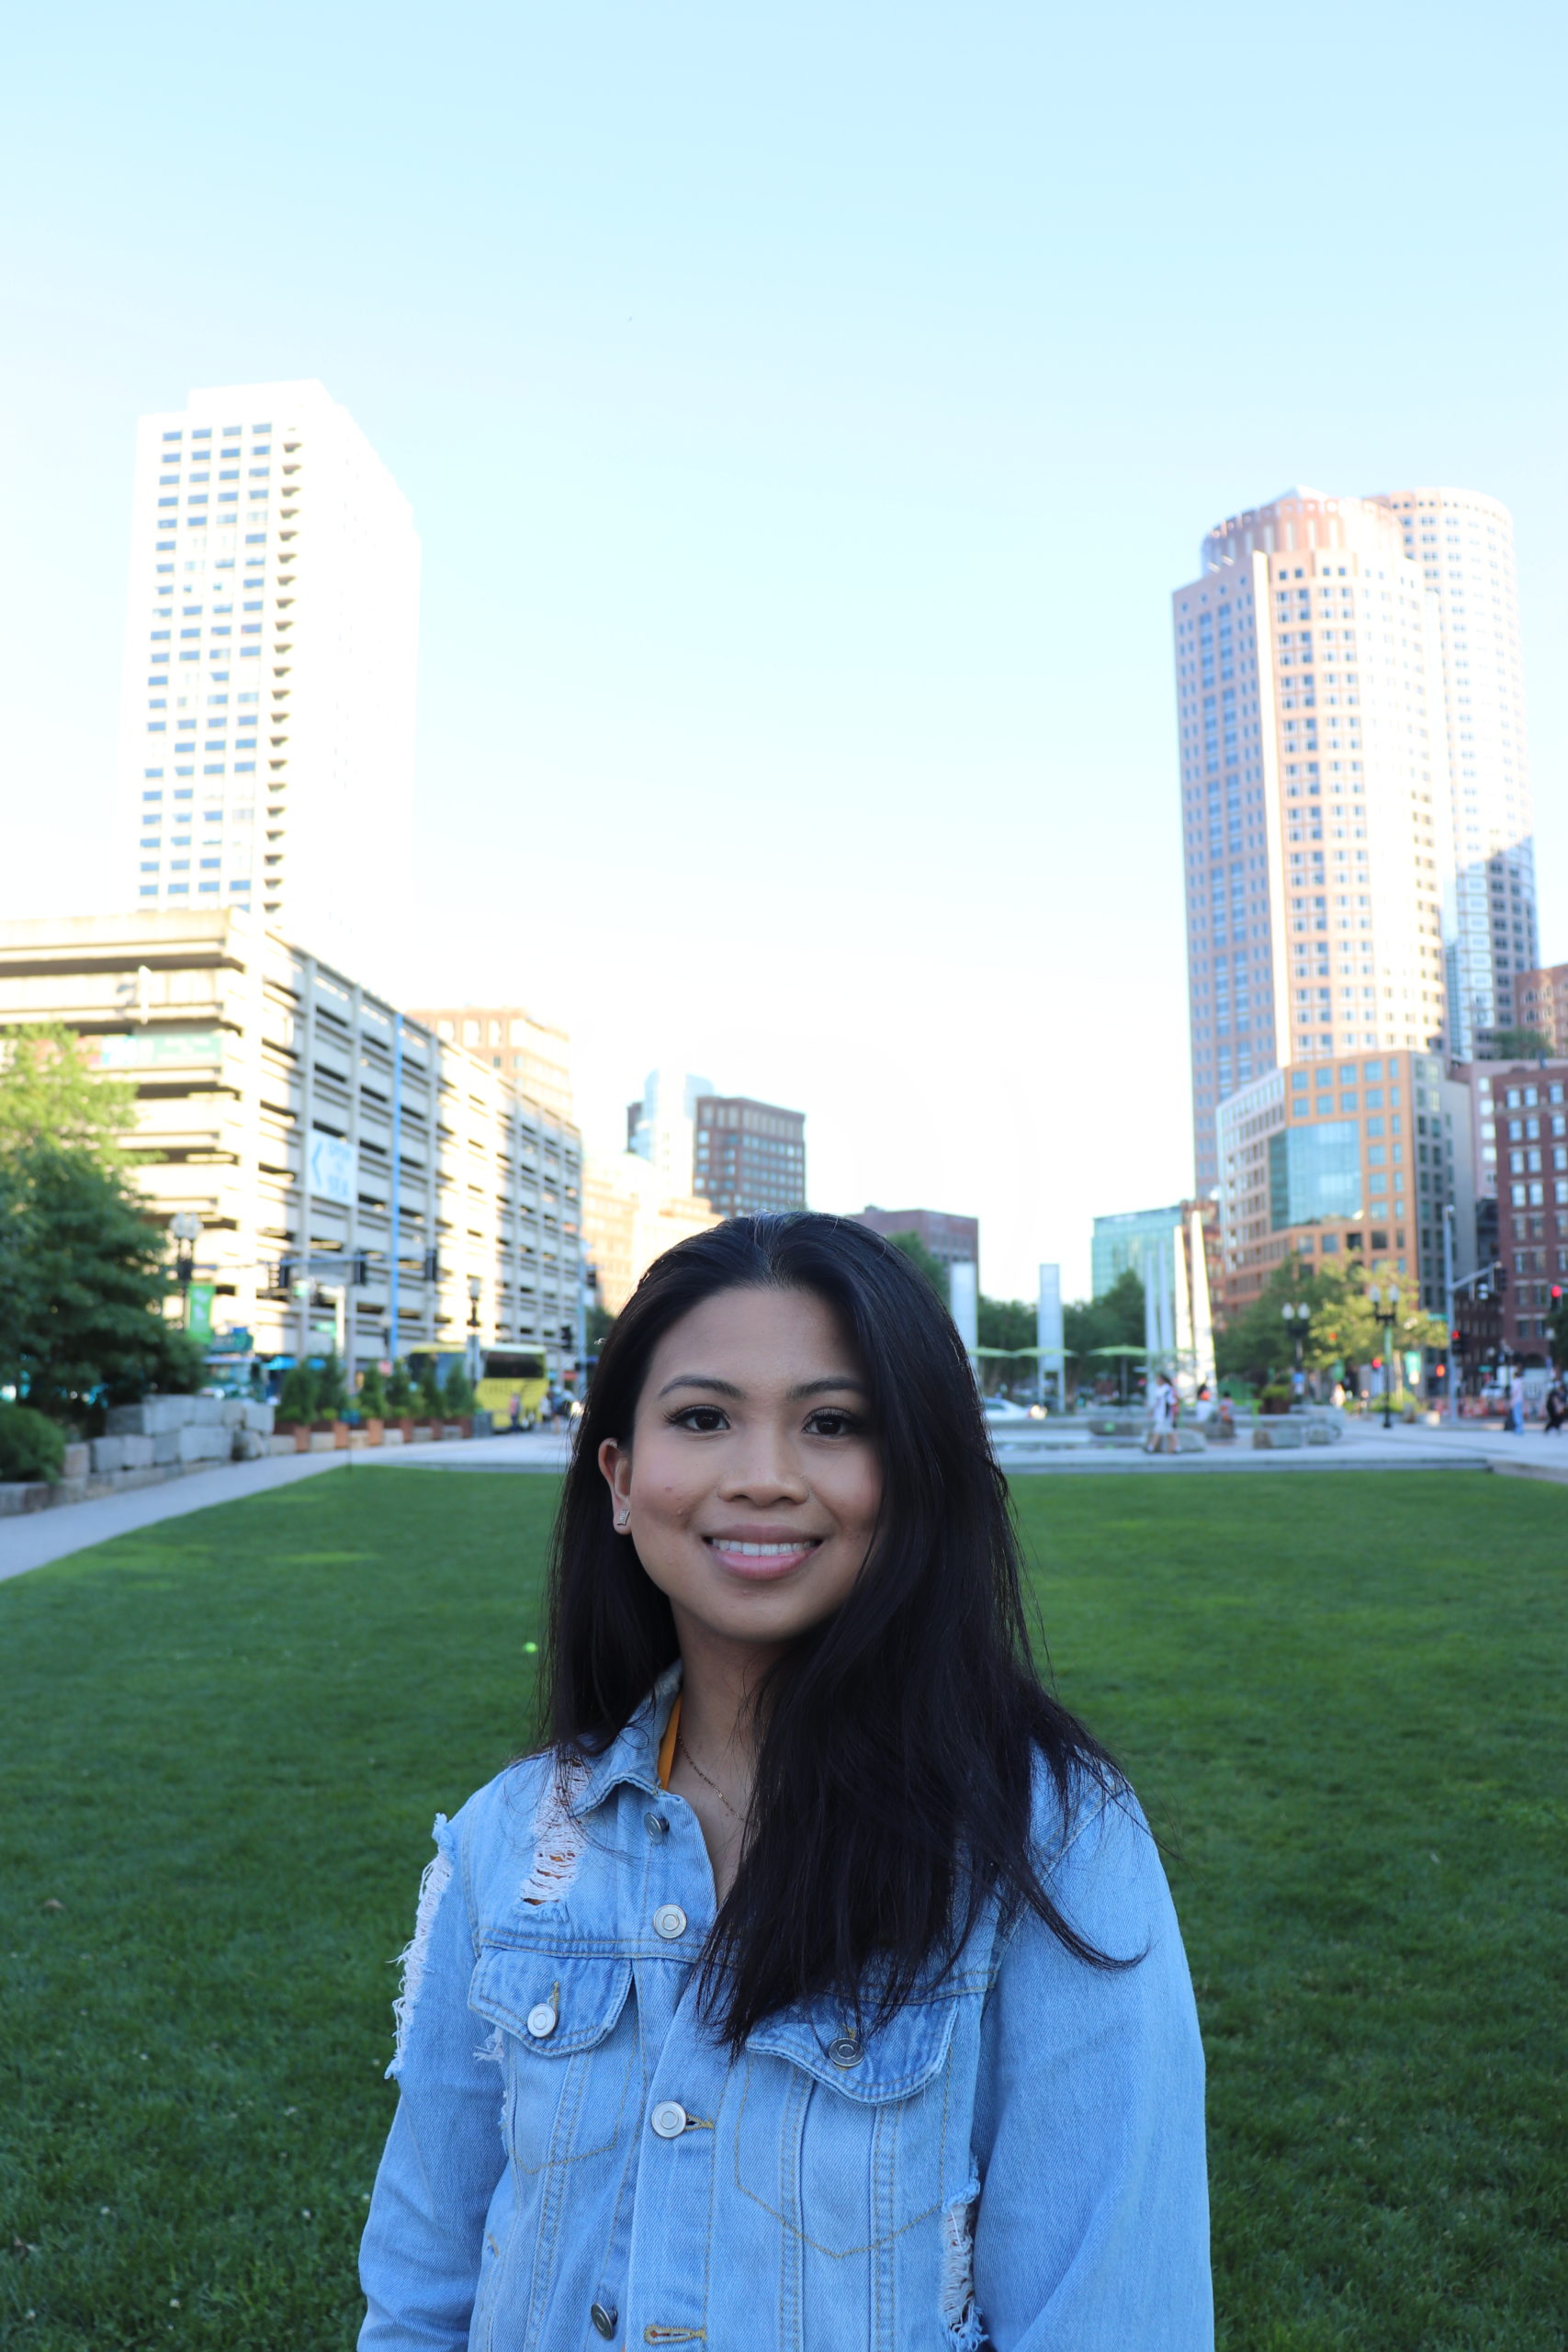 Nathalee Pauline, recent biology graduate, poses outside on the University of Toronto campus